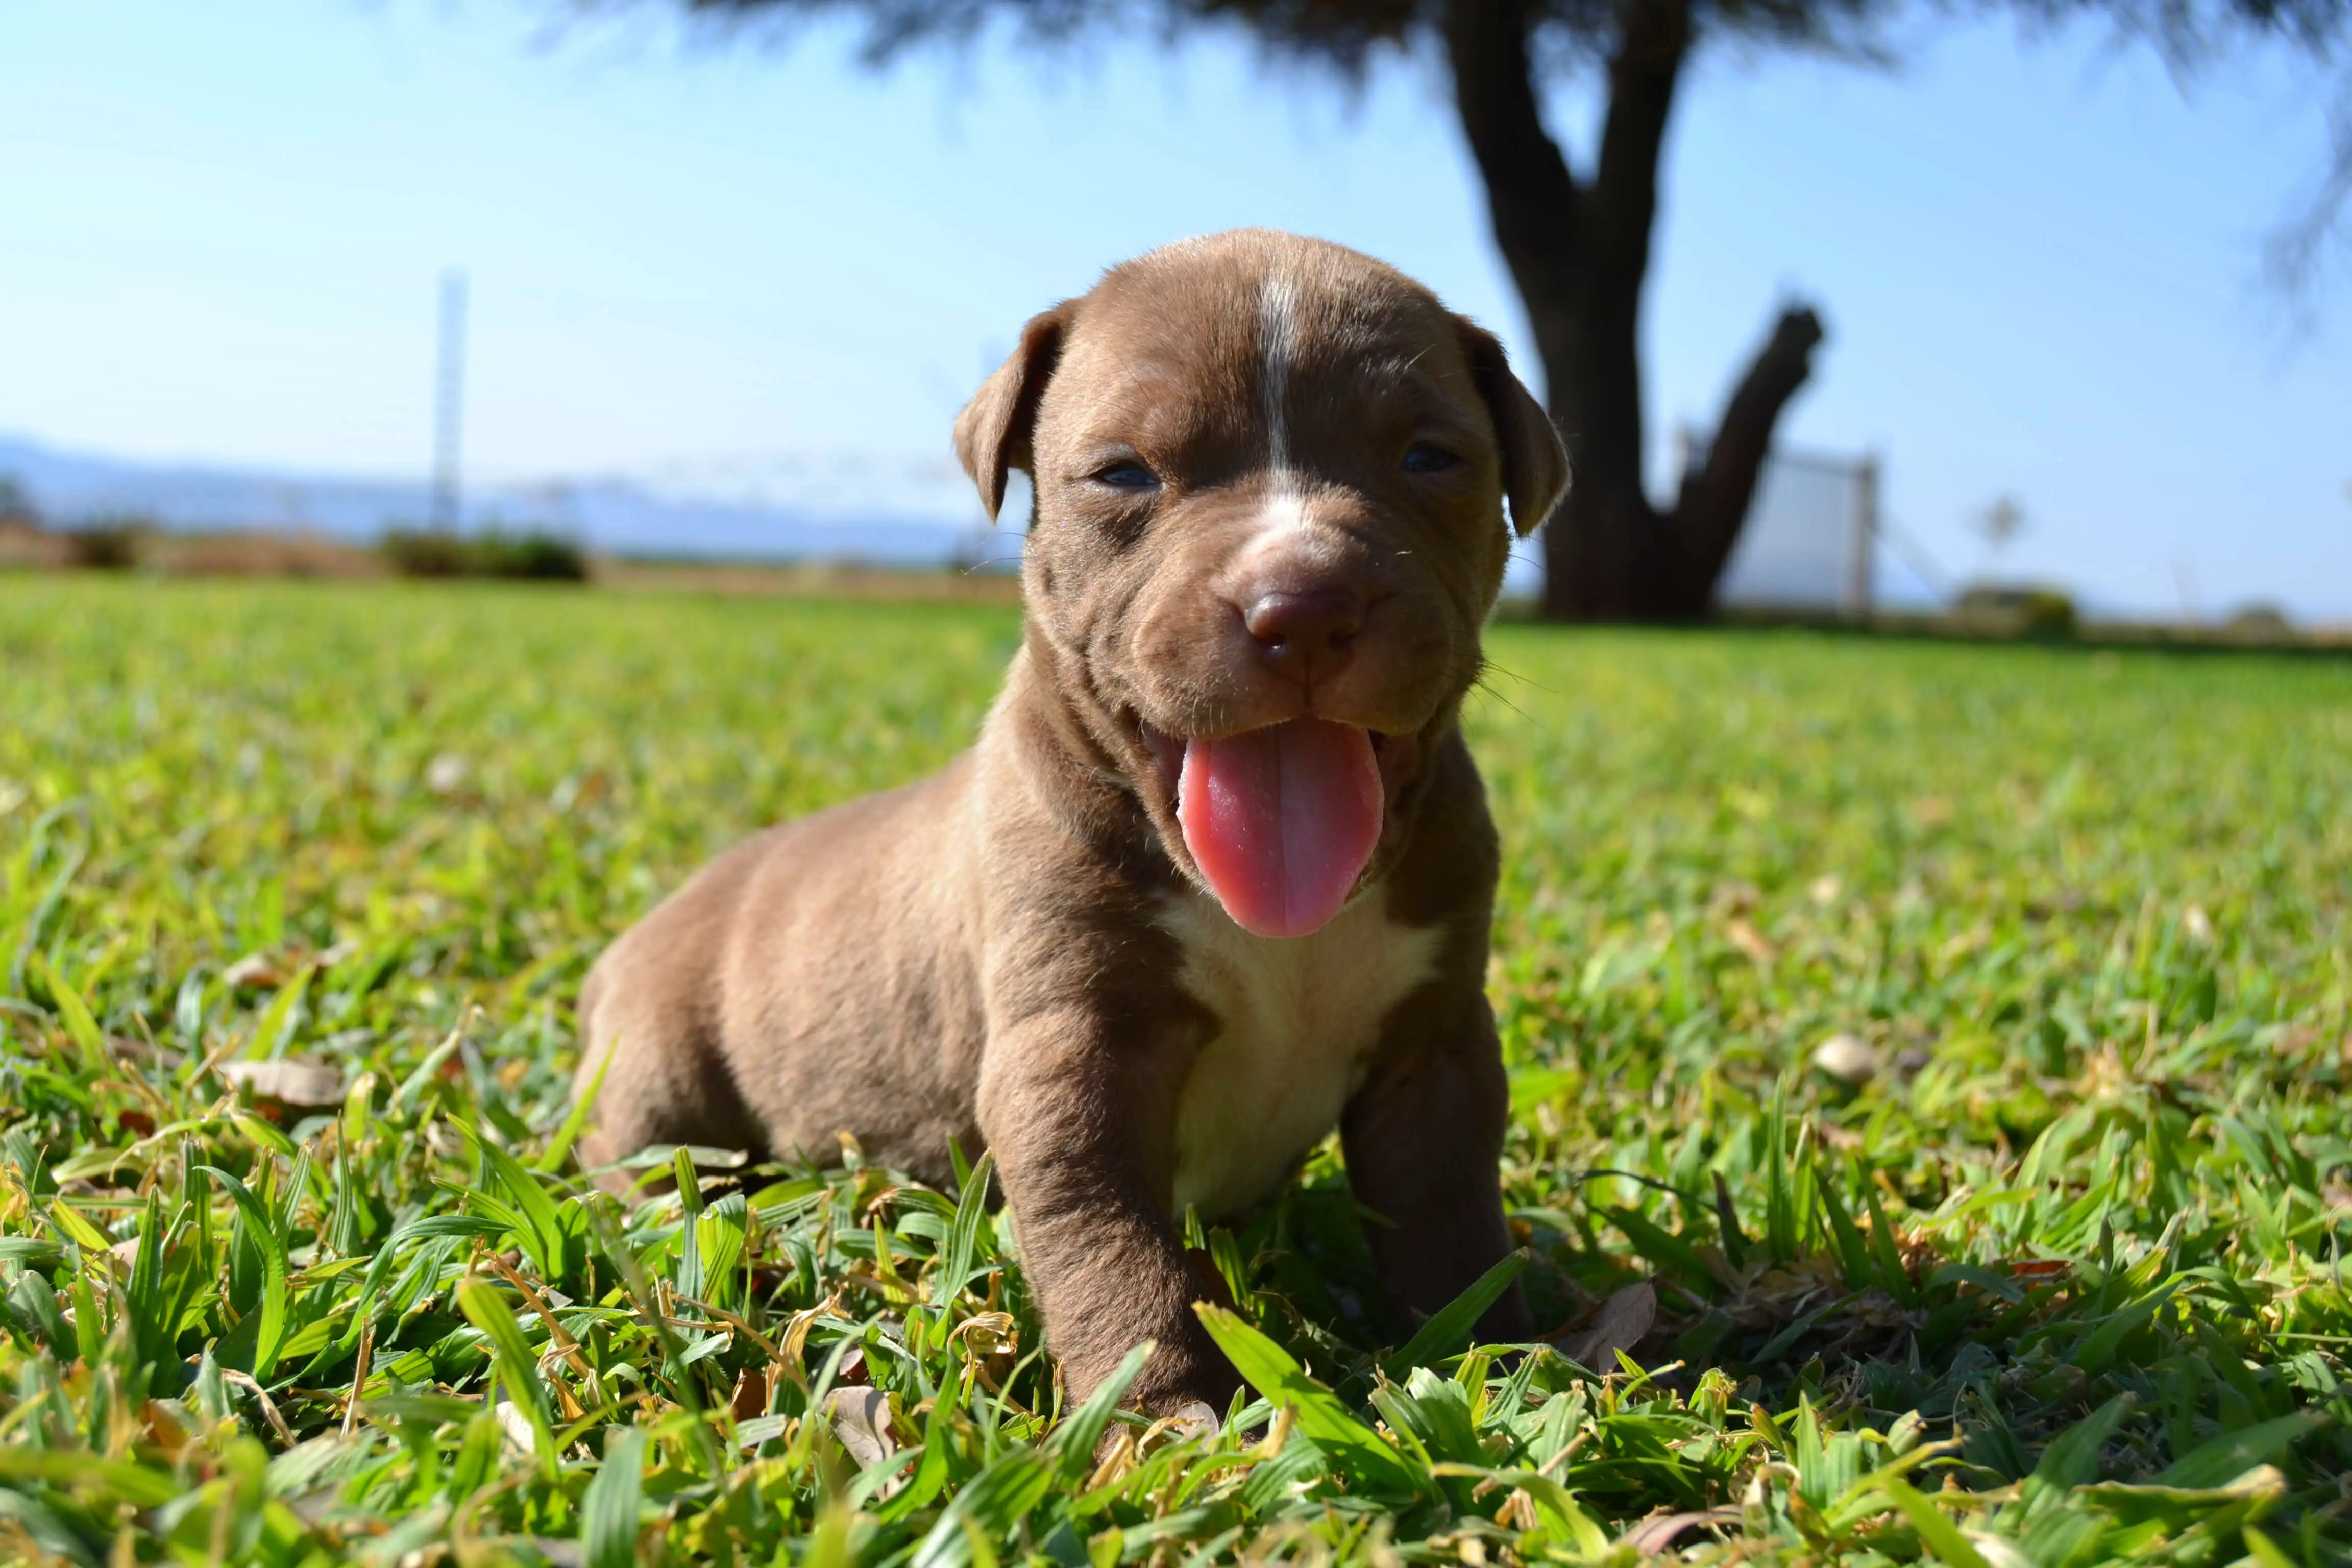 Pitbull Puppies for Sale in Other by Elzette Venter